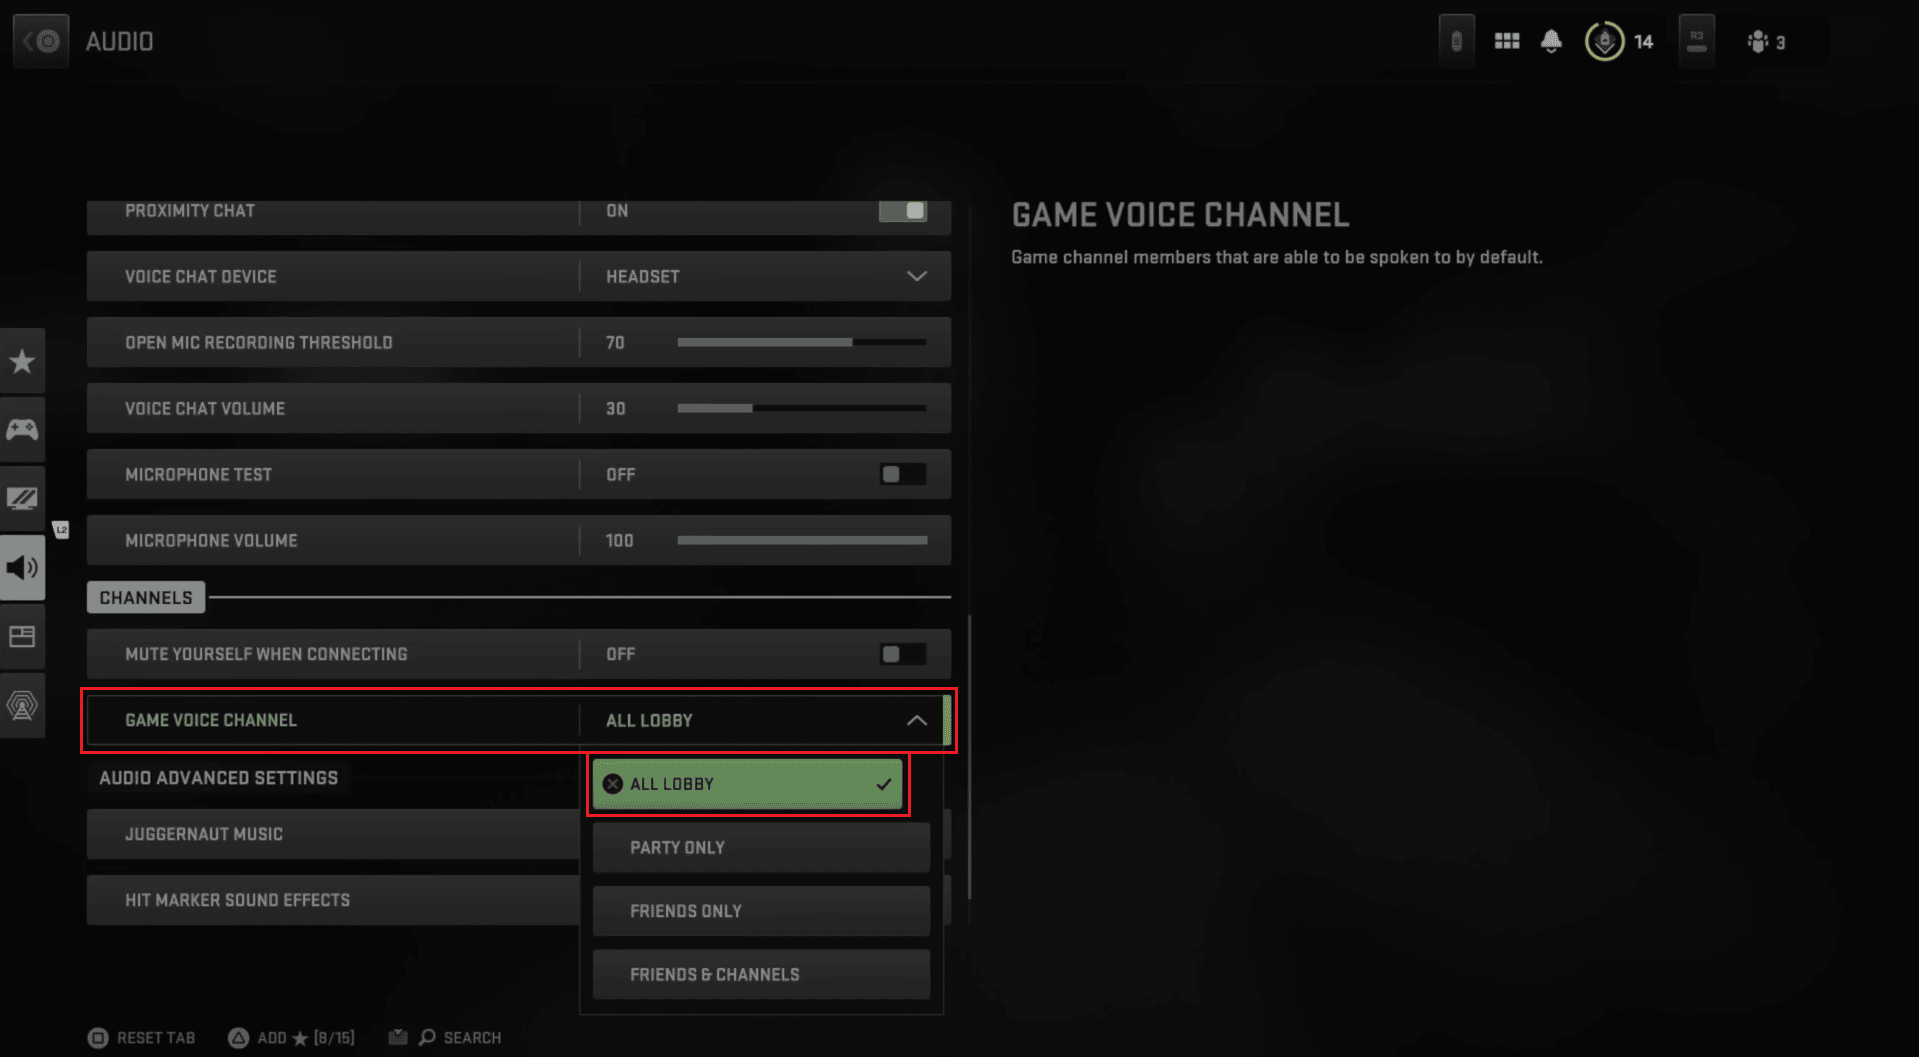 navigate to the CHANNELS section and select the ALL LOBBY option for GAME VOICE CHANNEL